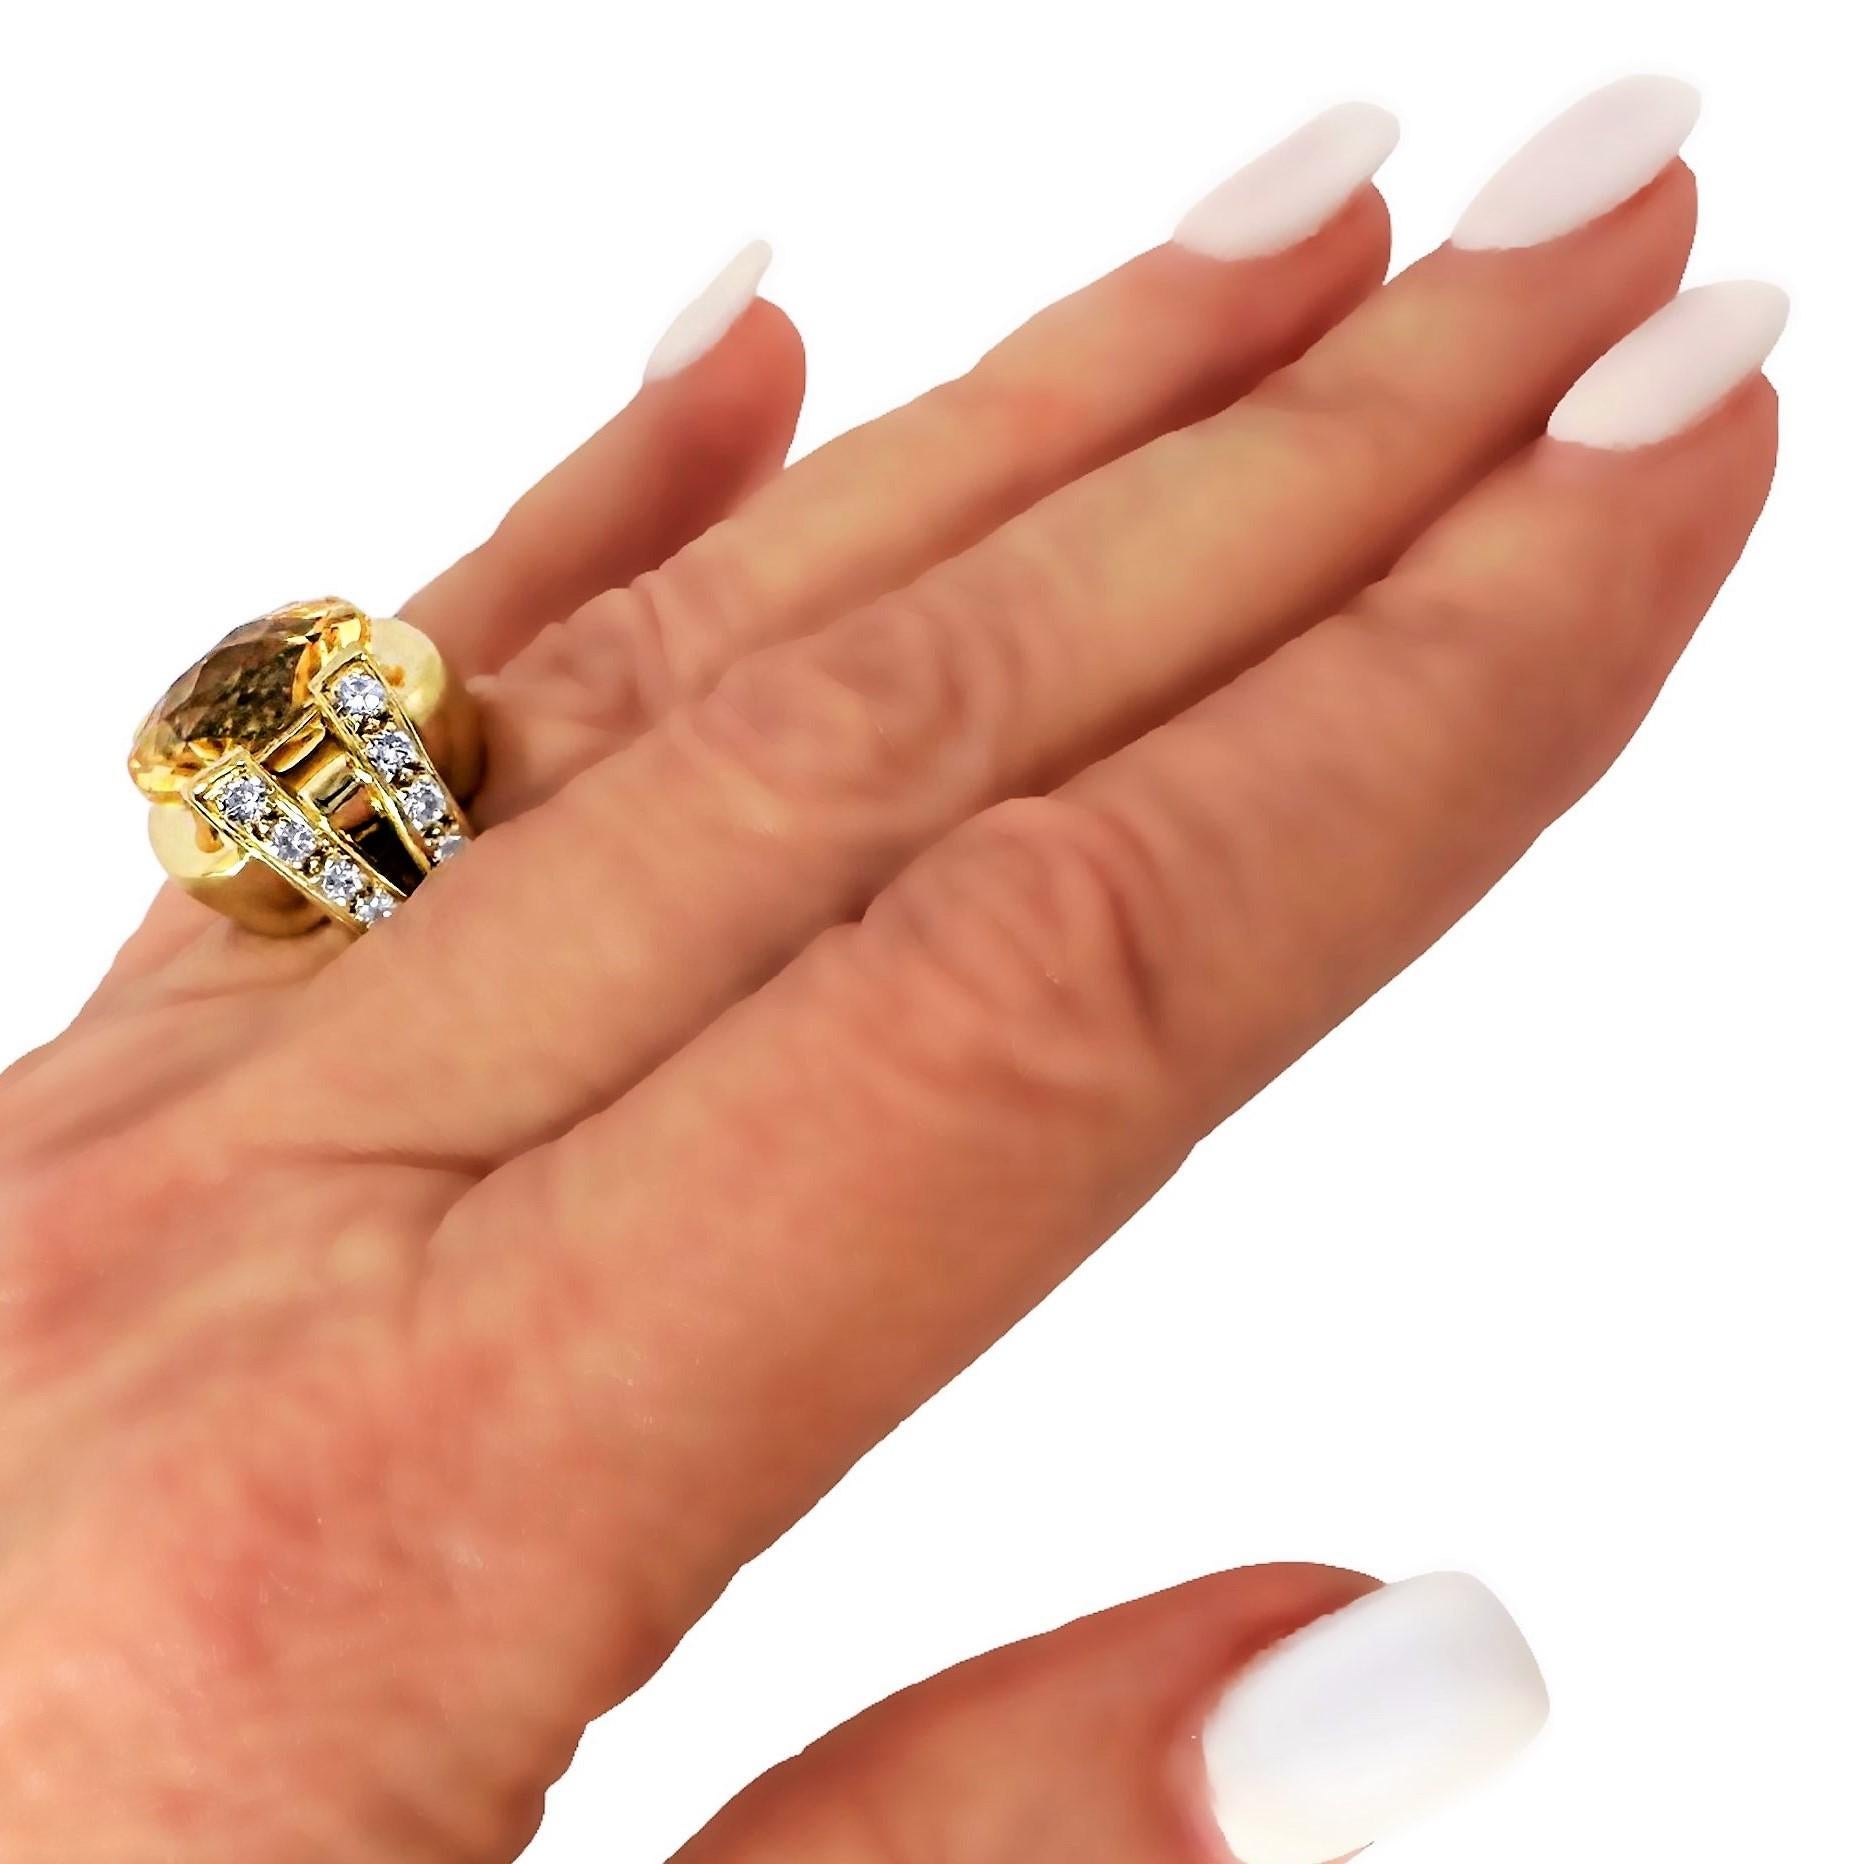 Very Dramatic Late-20th Century 18k Gold, Citrine and Diamond Fashion Ring For Sale 3